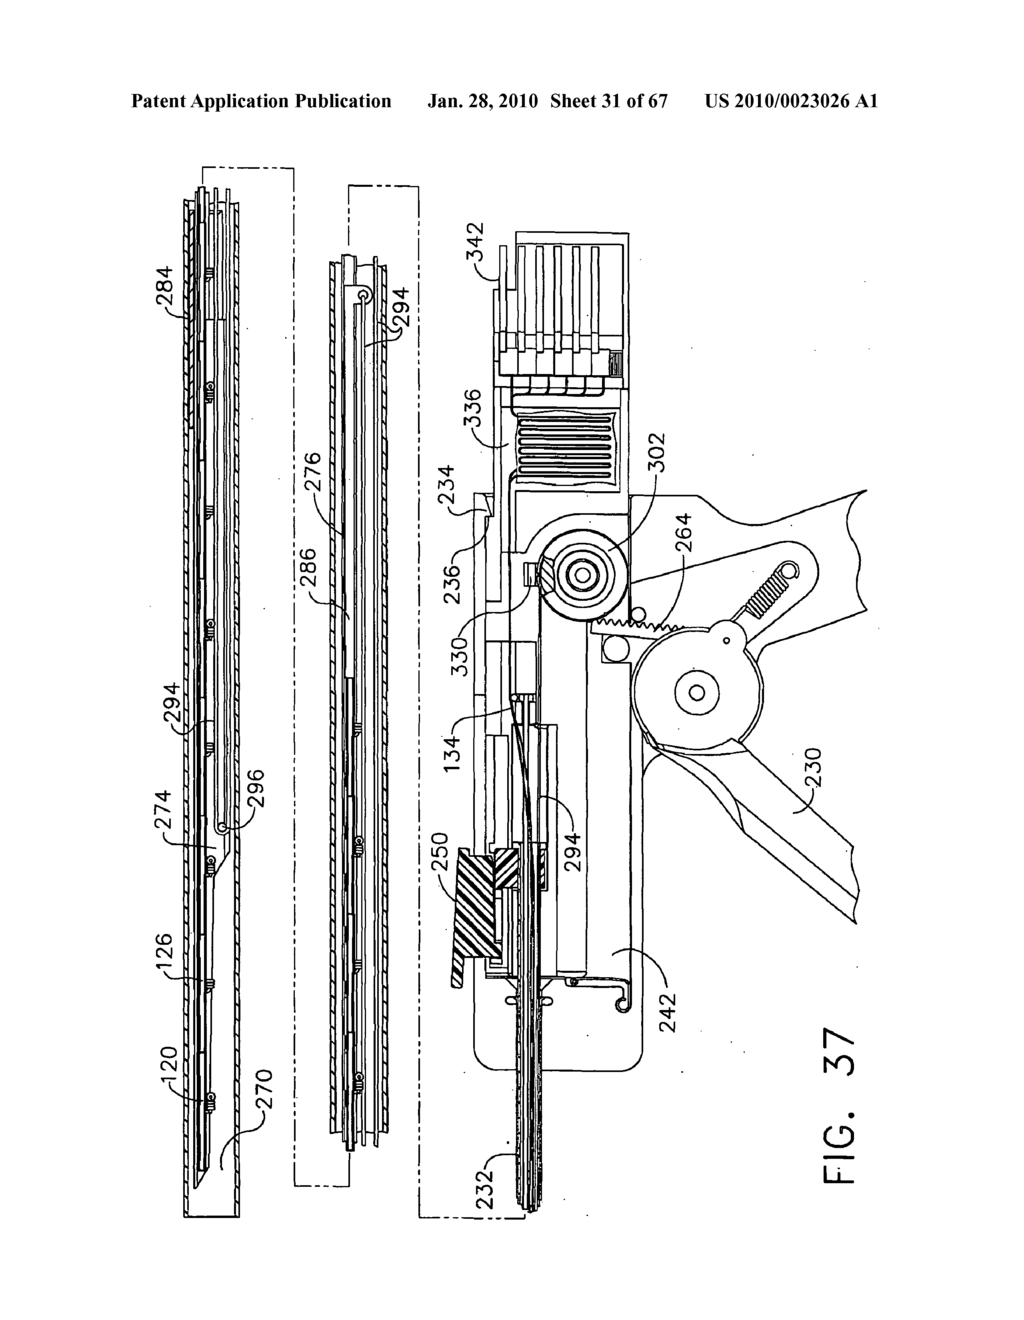 RELOADABLE LAPAROSCOPIC FASTENER DEPLOYING DEVICE WITH DISPOSABLE CARTRIDGE FOR USE IN A GASTRIC VOLUME REDUCTION PROCEDURE - diagram, schematic, and image 32